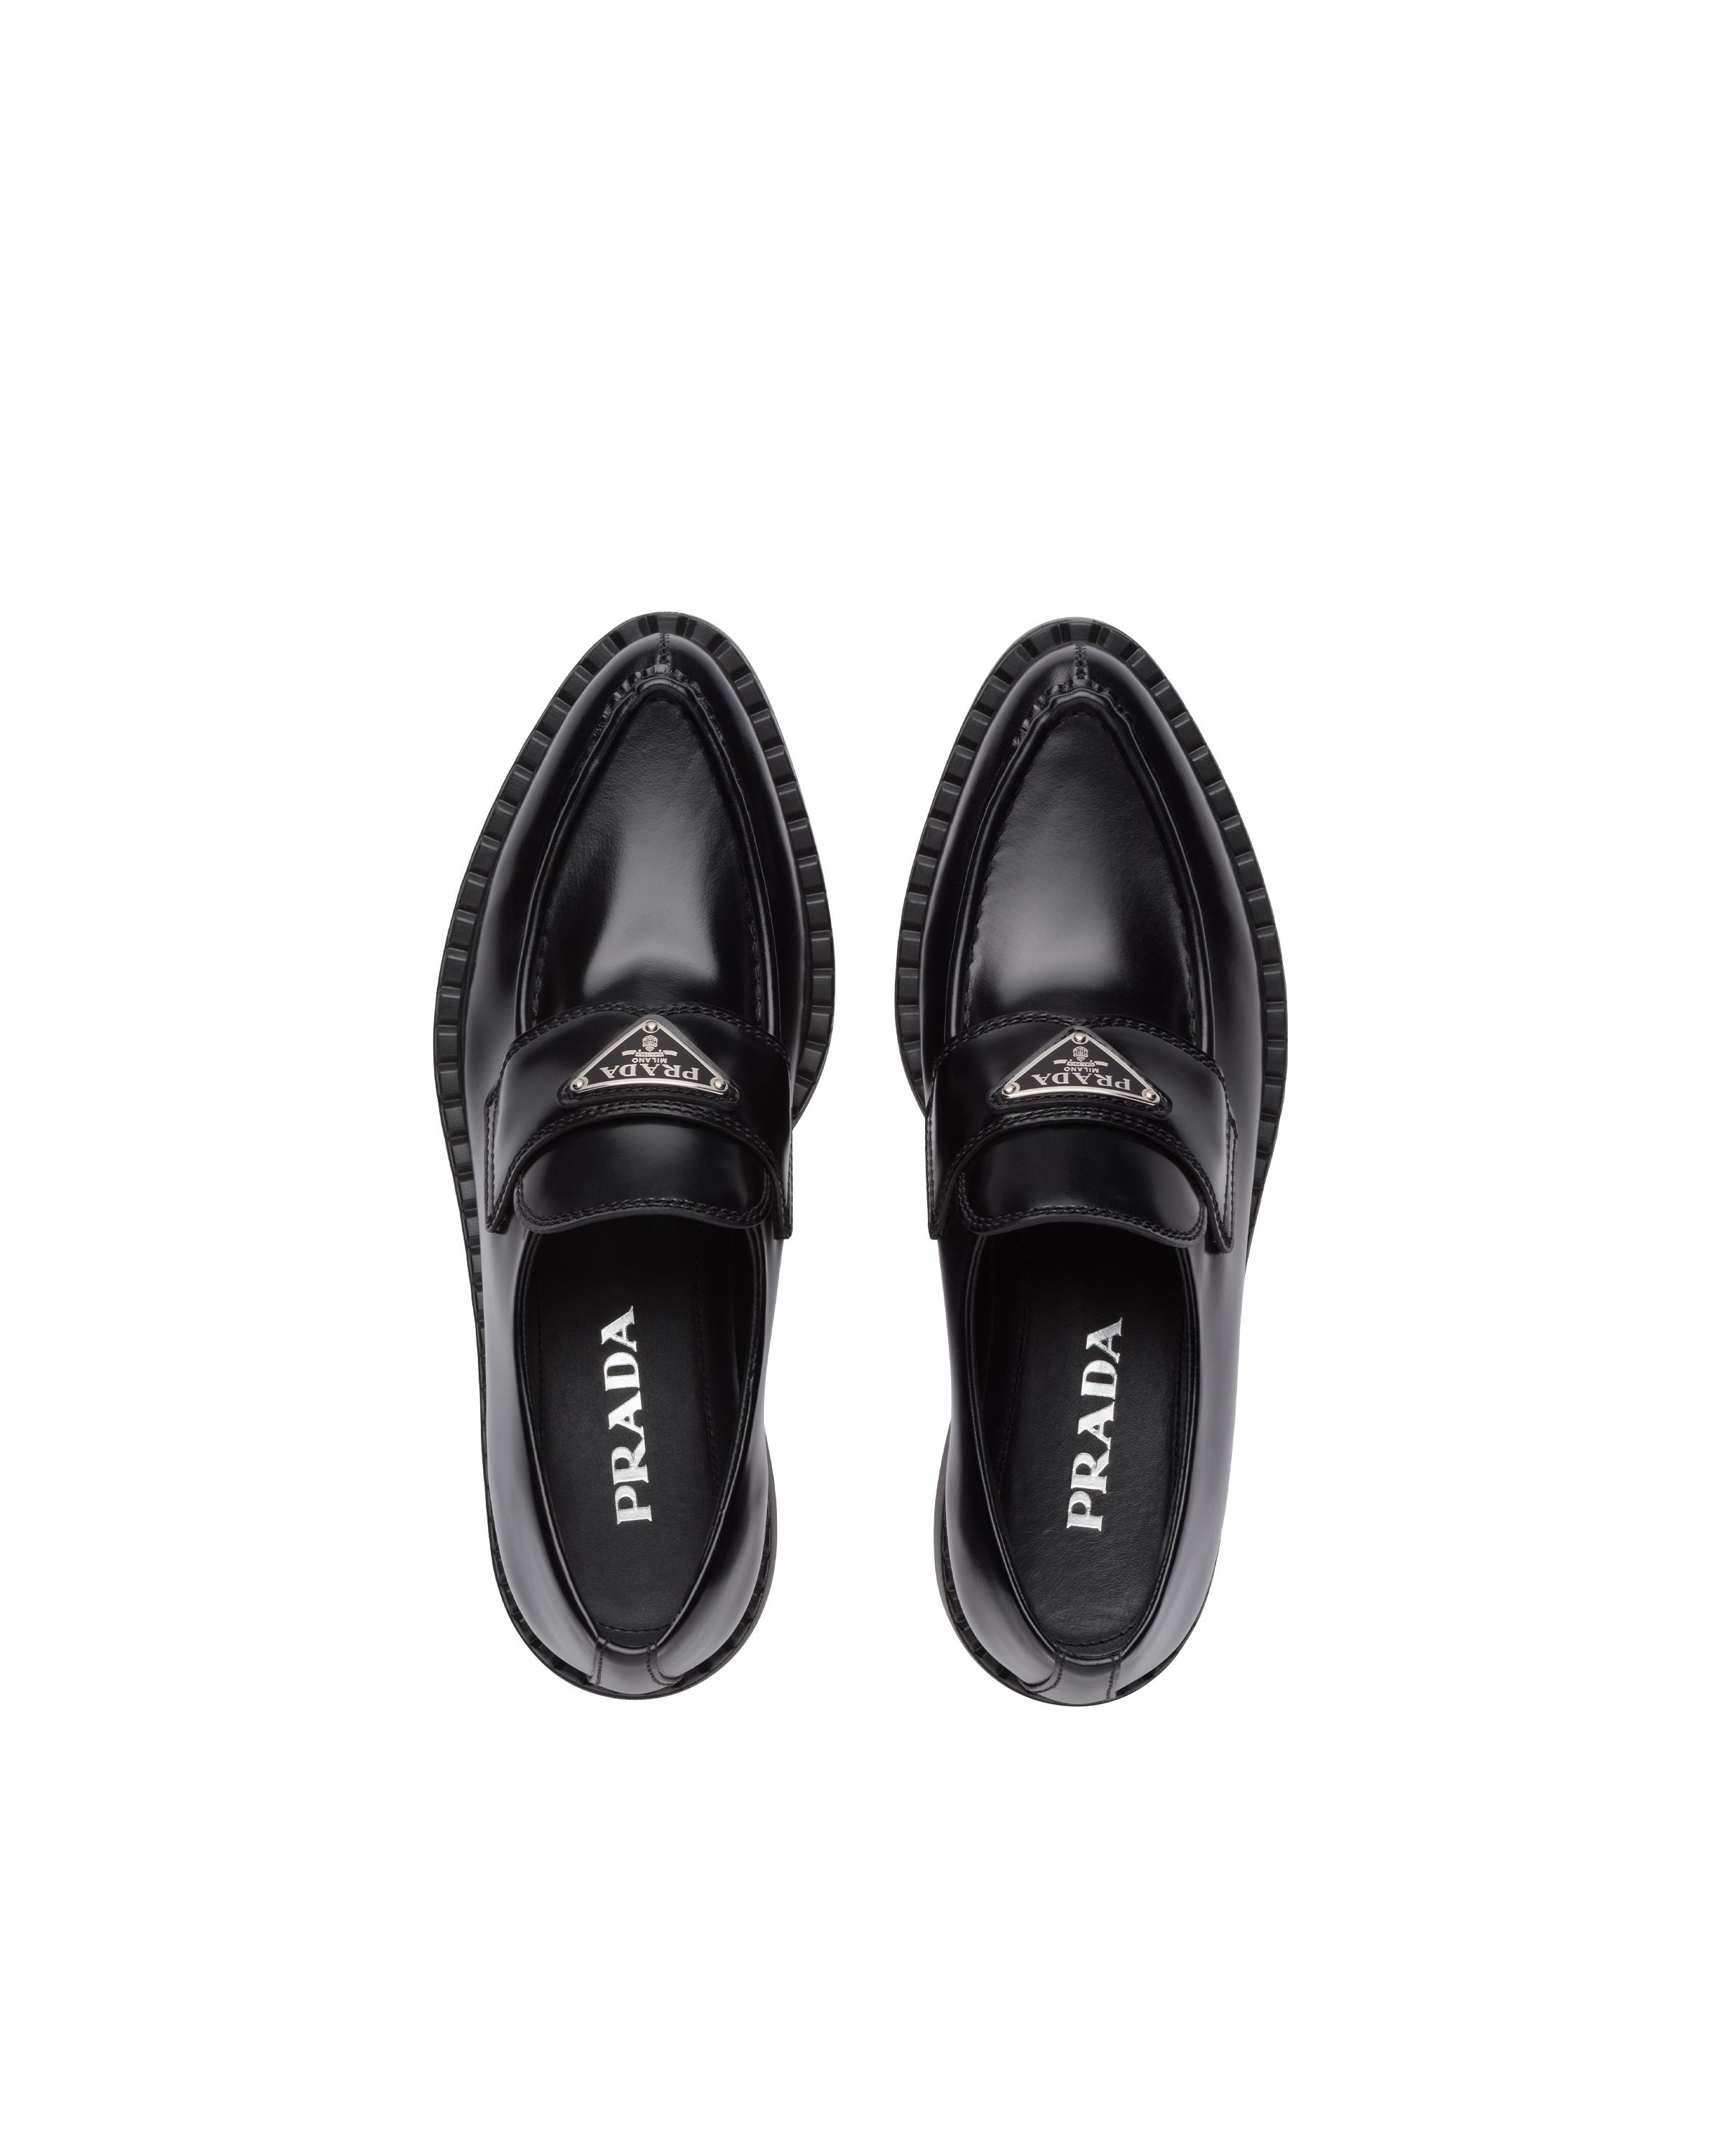 Prada Chocolate Sharp Brushed Leather Loafers in Black | Lyst